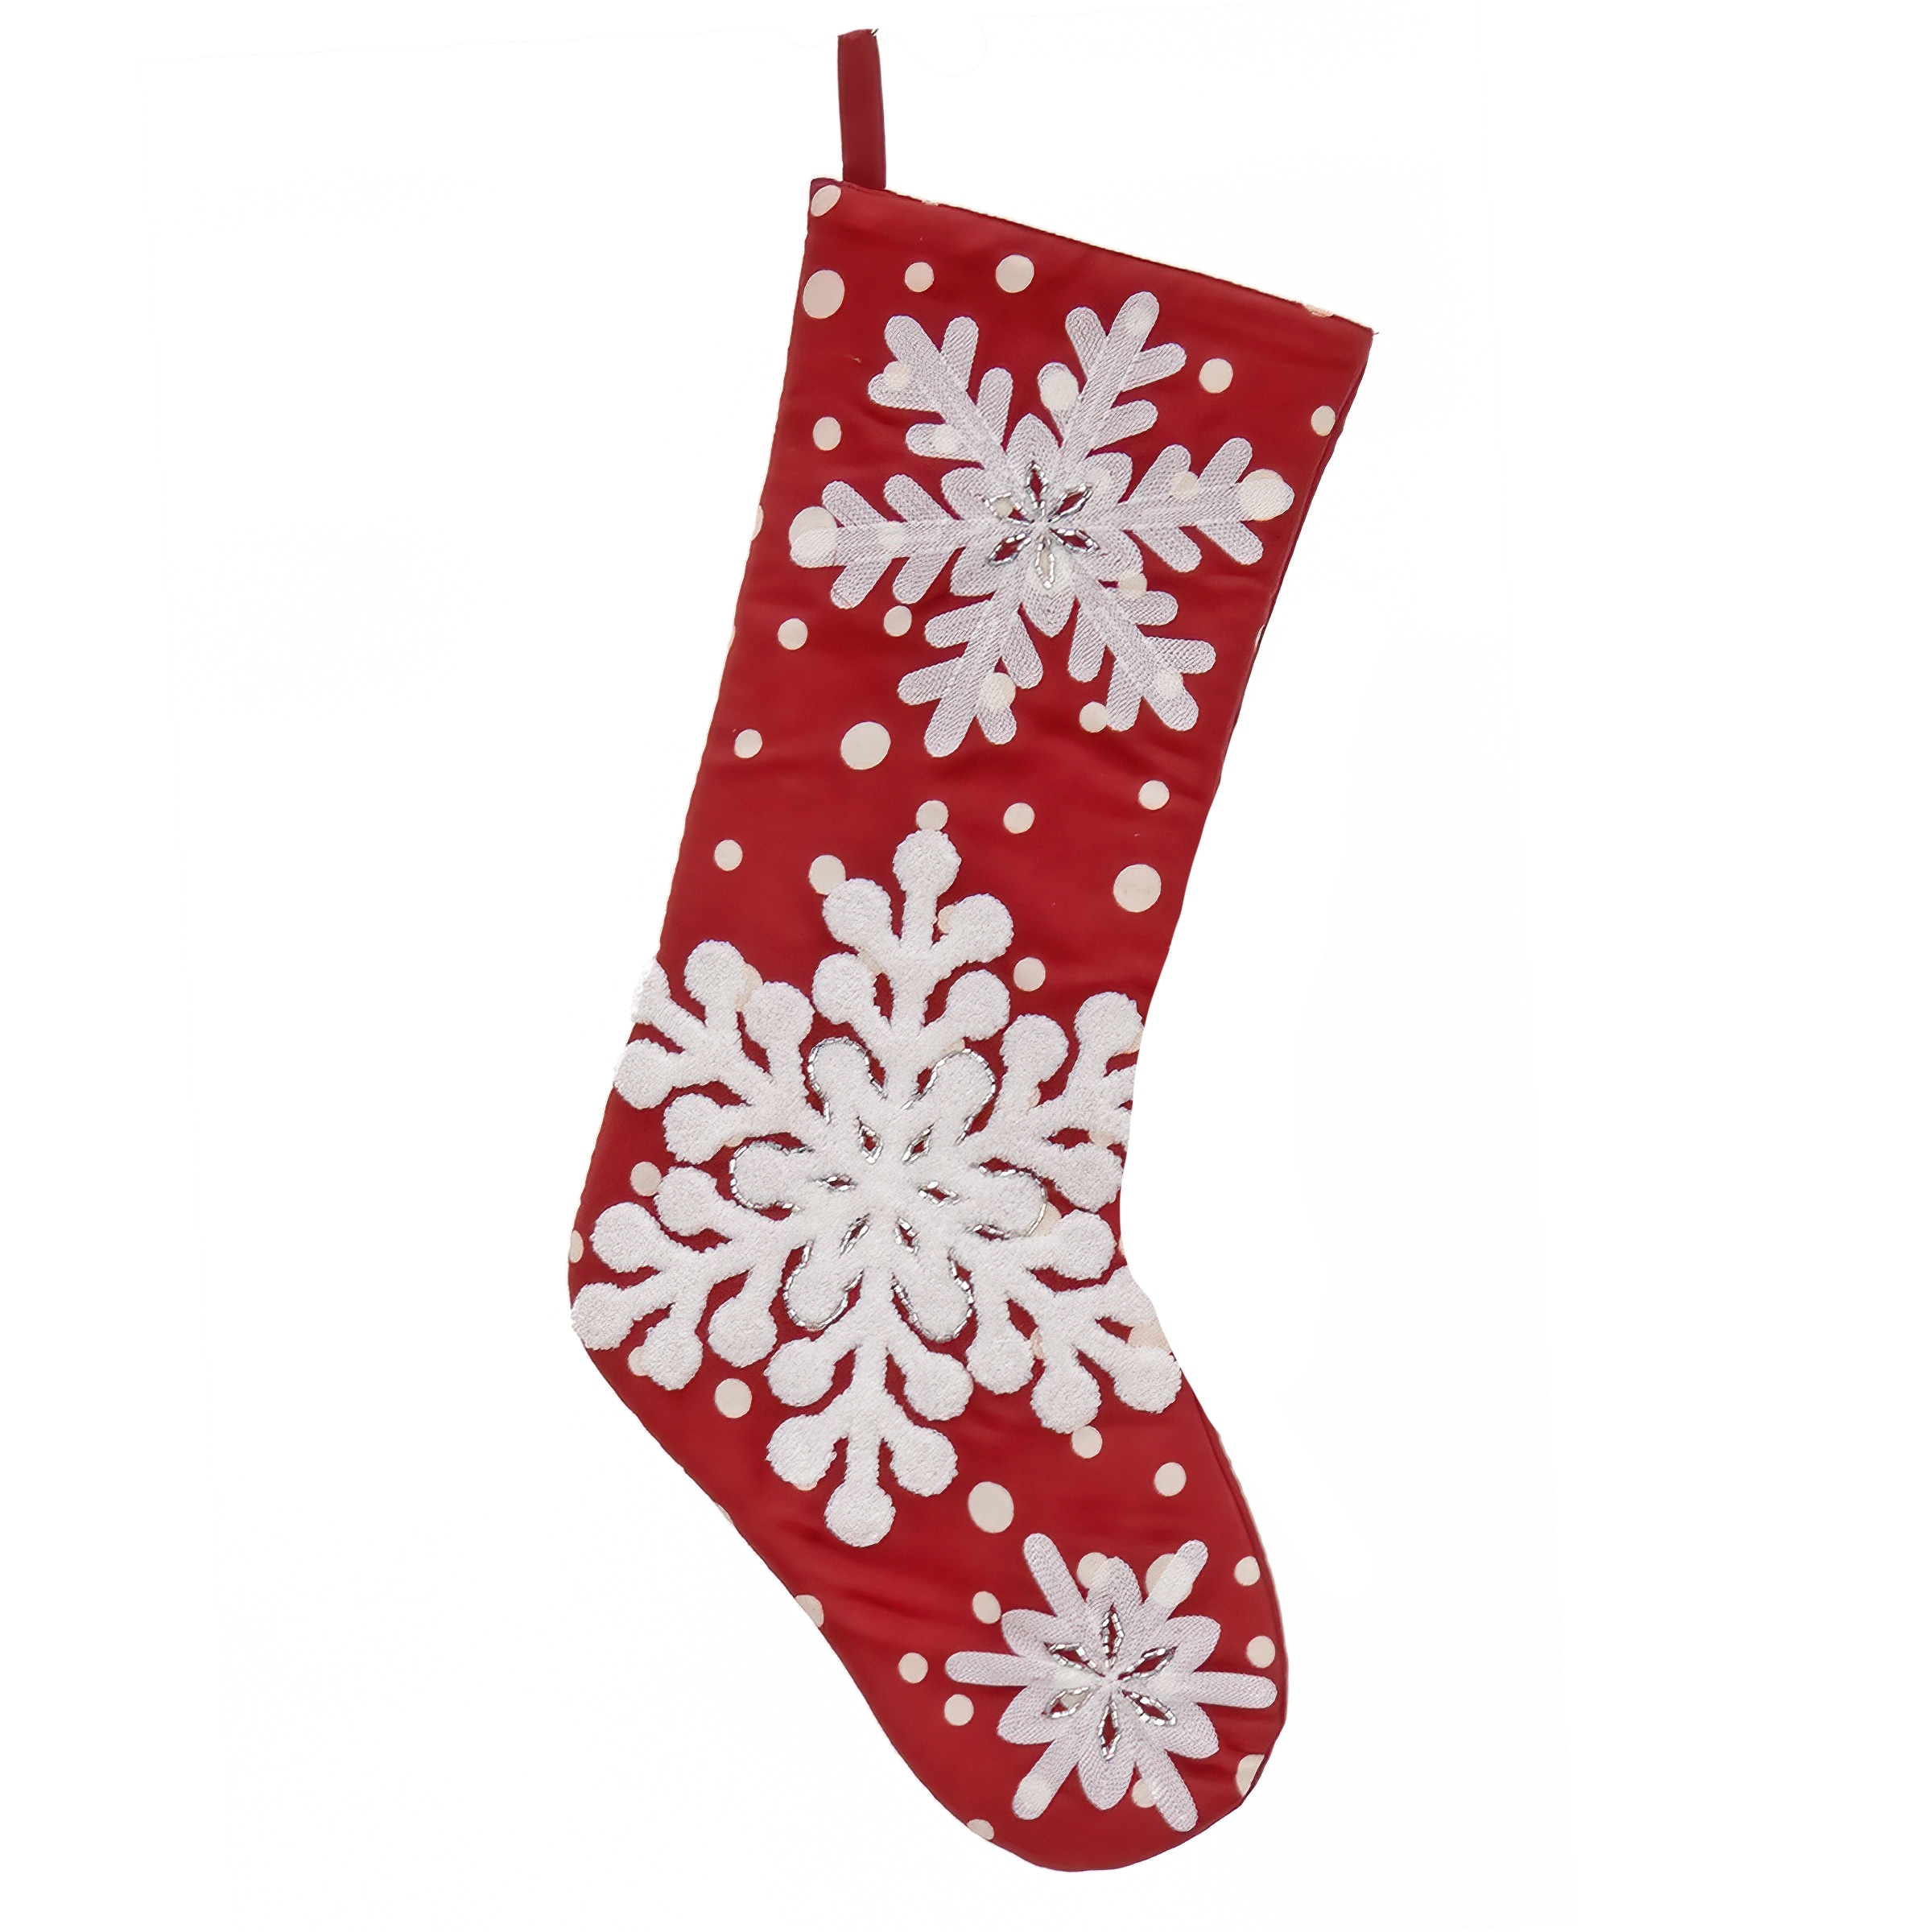 https://ak1.ostkcdn.com/images/products/is/images/direct/ef5a7cfd2a36db2d165a69c42716c9313d2cb5ae/HGTV--20%22-Red-Stocking-with-Snowflake-Embroidery.jpg